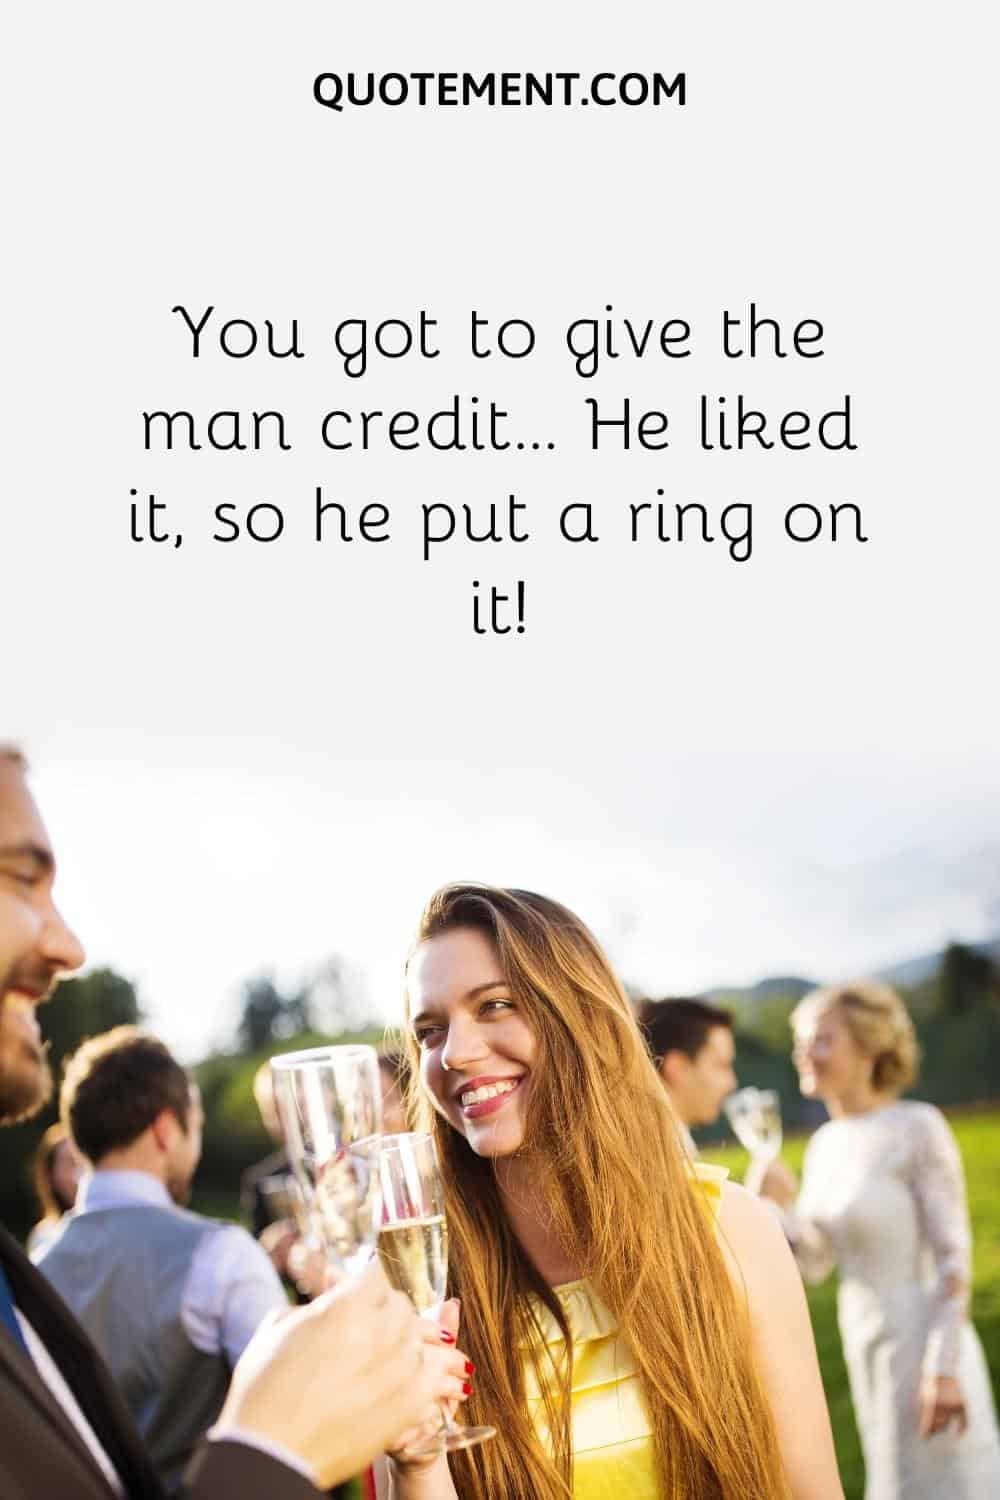 You got to give the man credit… He liked it, so he put a ring on it!